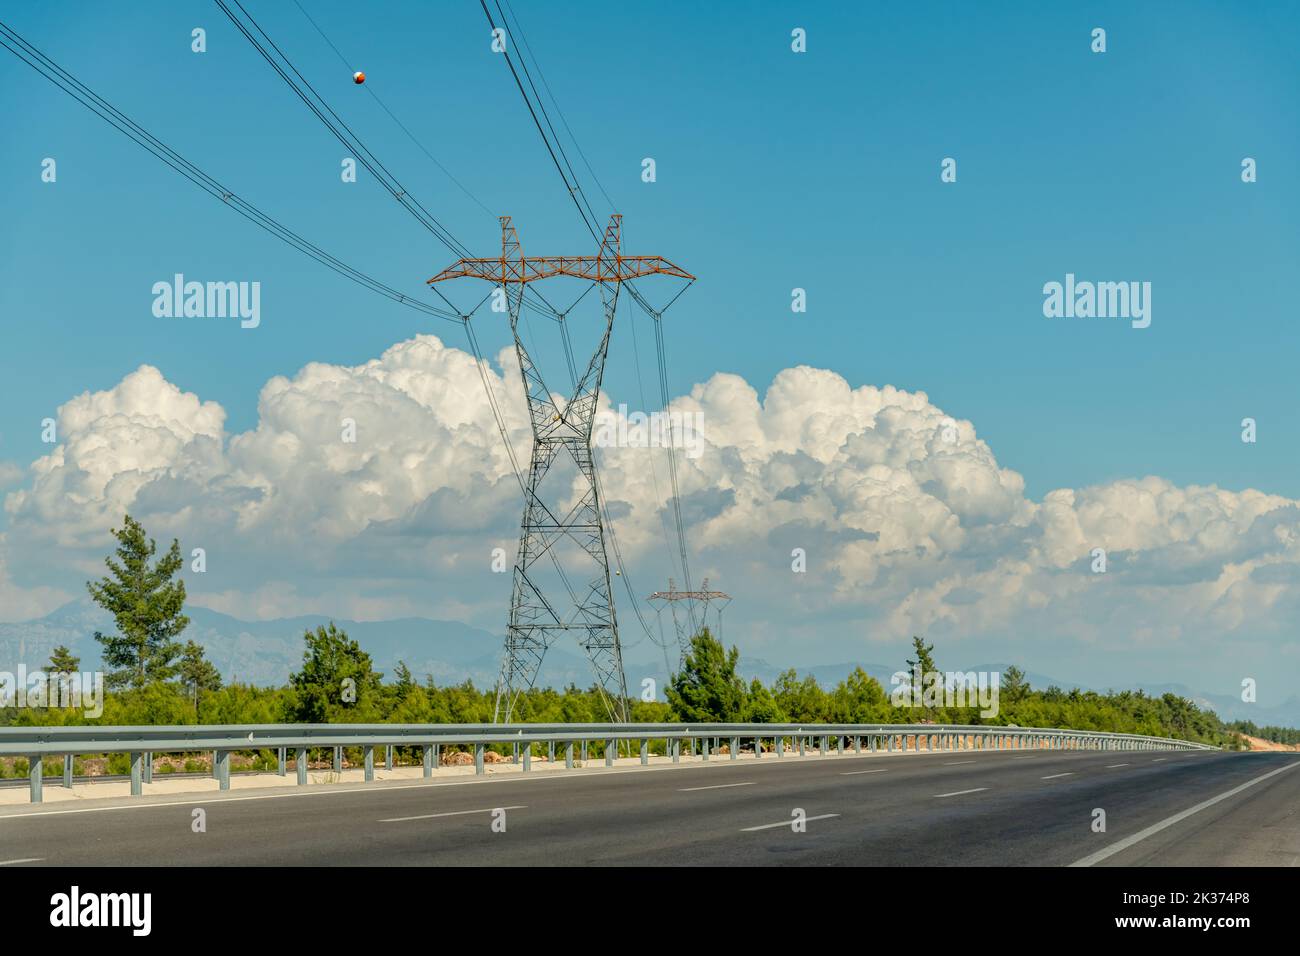 Electric power poles High voltage electrical power poles along a national highway Stock Photo